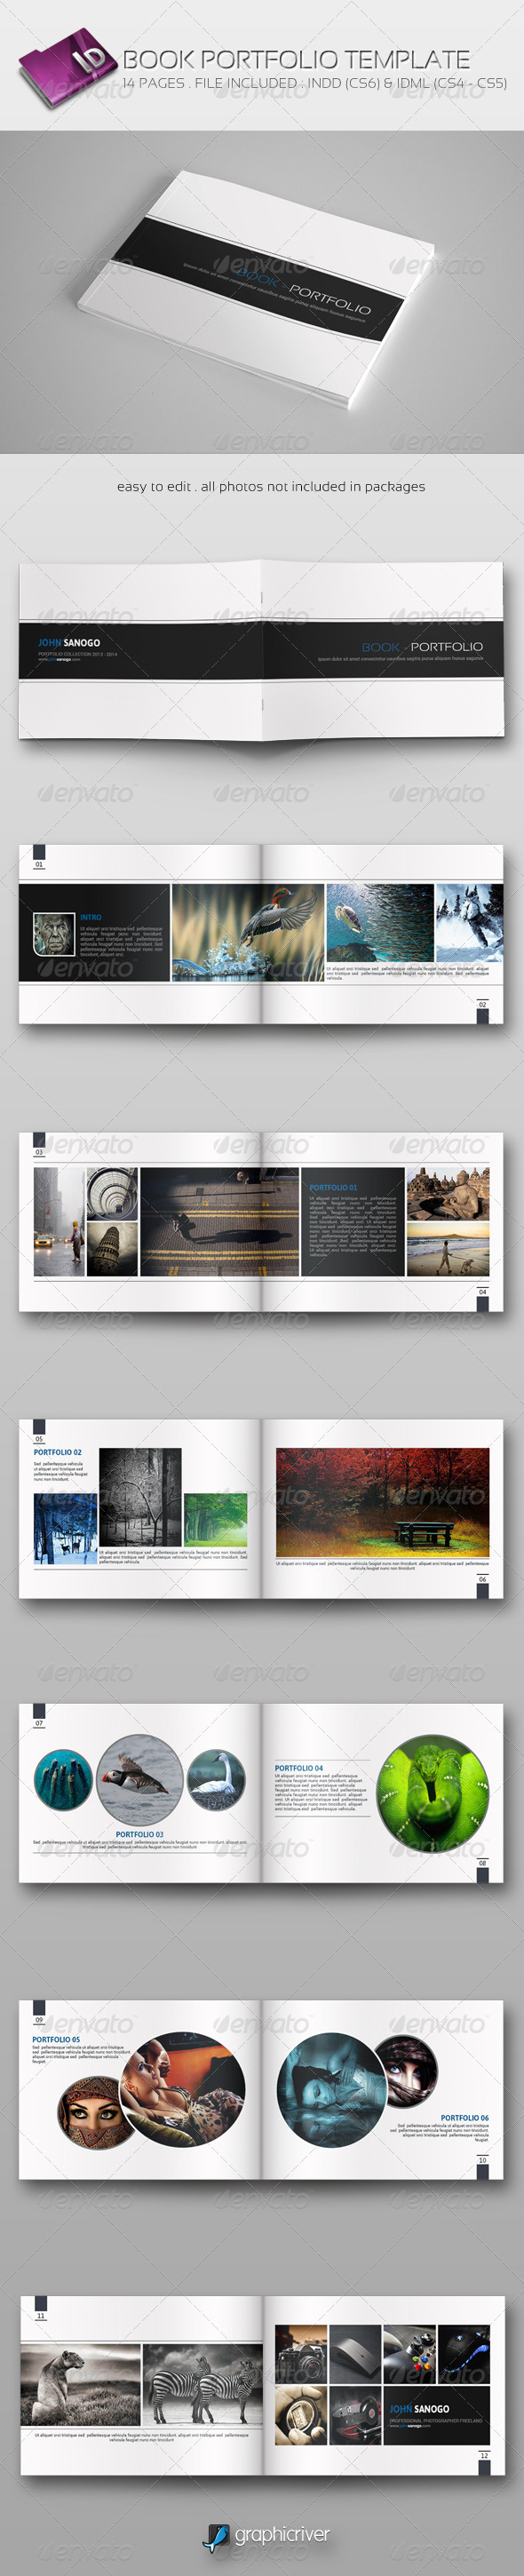 Portfolio Template Stationery And Design Templates Page 2